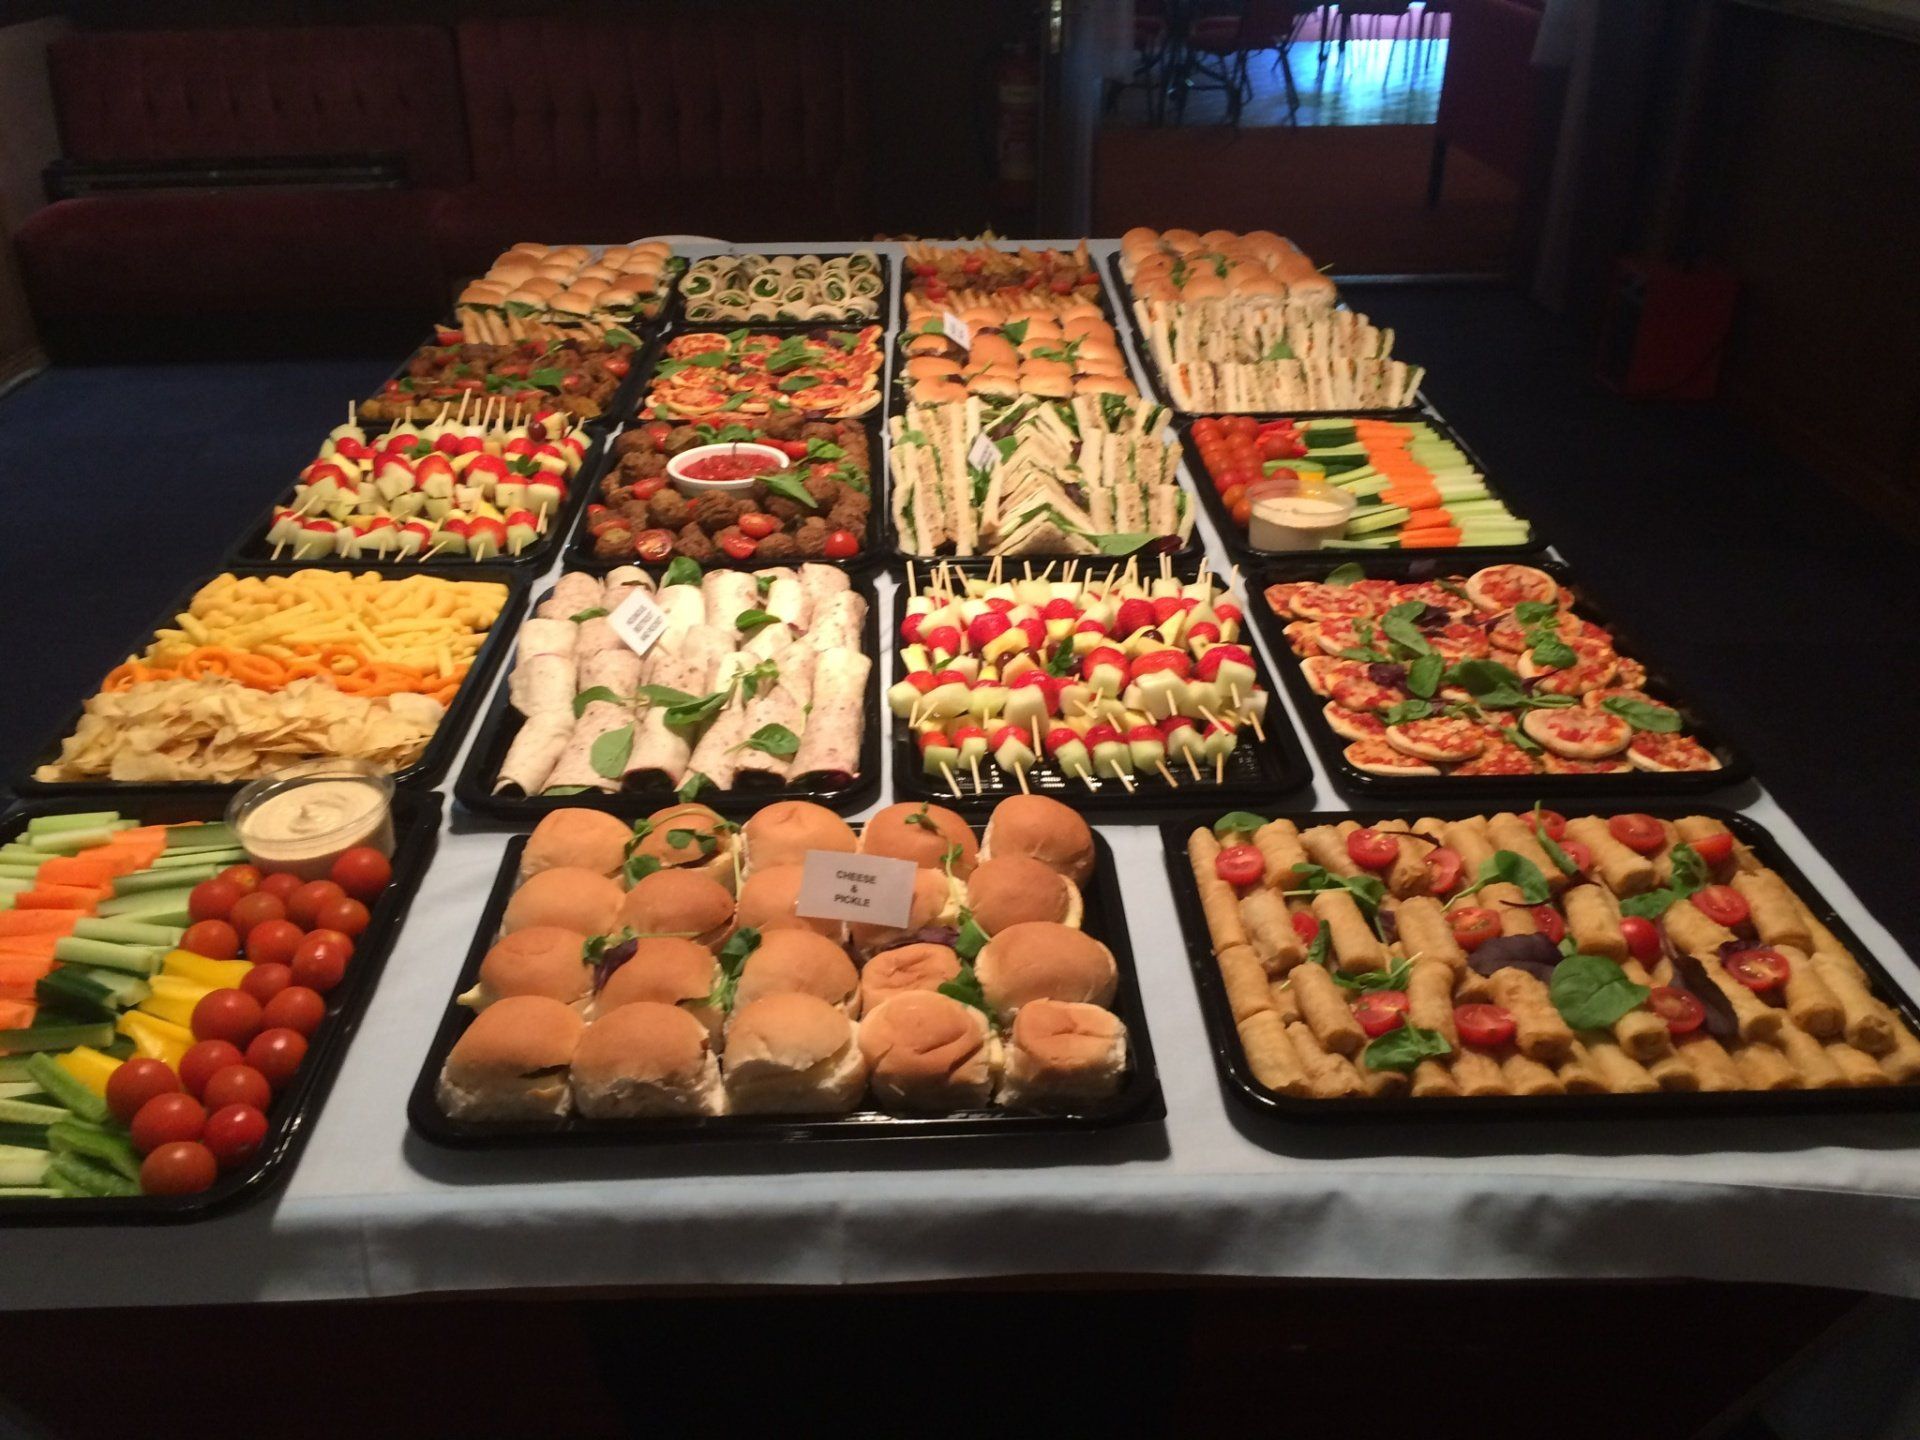 Catering for all occasions - Southend-on-Sea - Eatstreet Catering - Wedding buffets